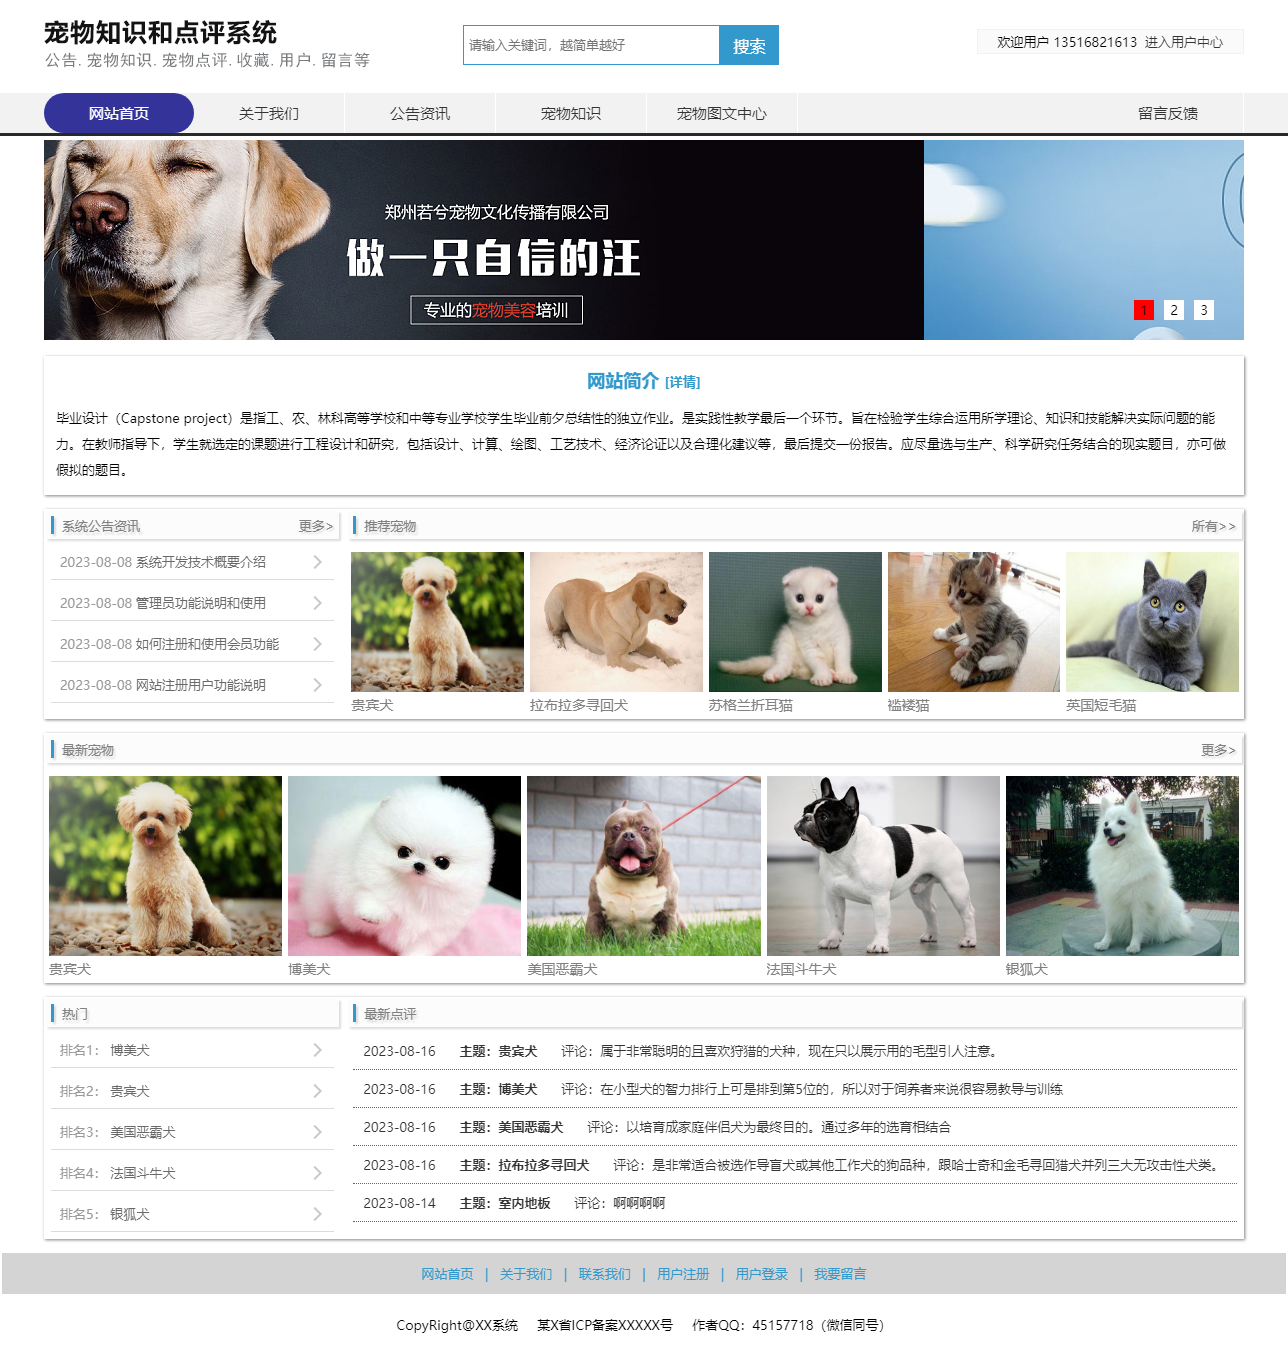 a1-Pet knowledge and review system website homepage.png